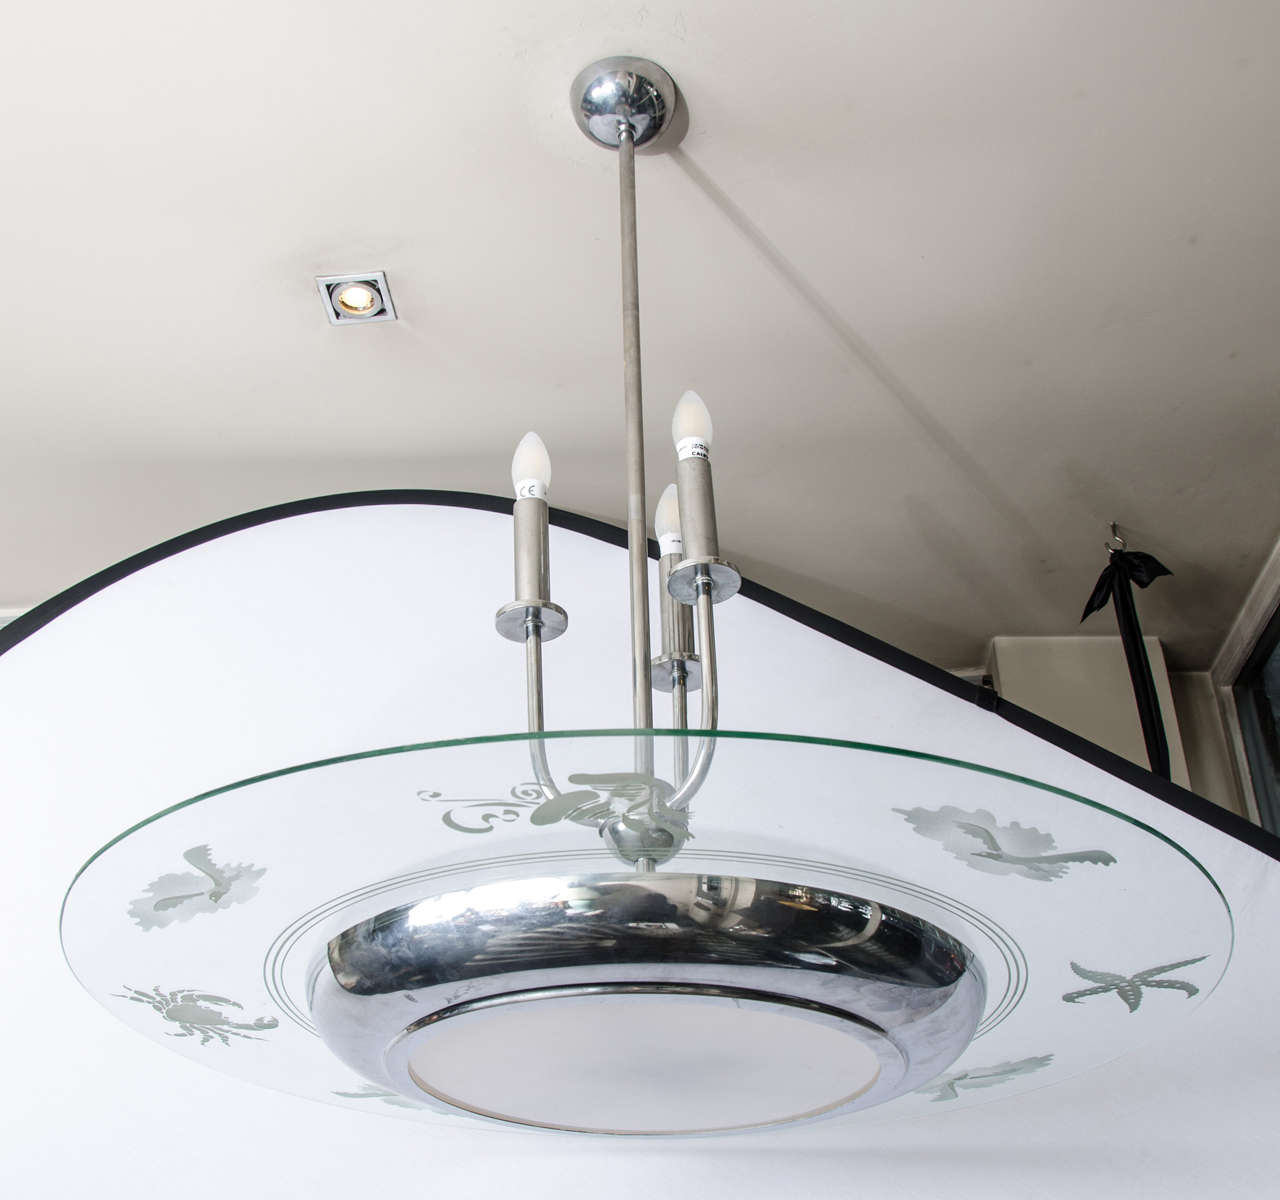 1930s Art Deco chandelier with engraved glass. Italian chandelier in chrome and glass. Three holder electric candelabra plus three bulbs in the base of the dome. The glass is engraved with beautiful sea animals, including crab, octopus and